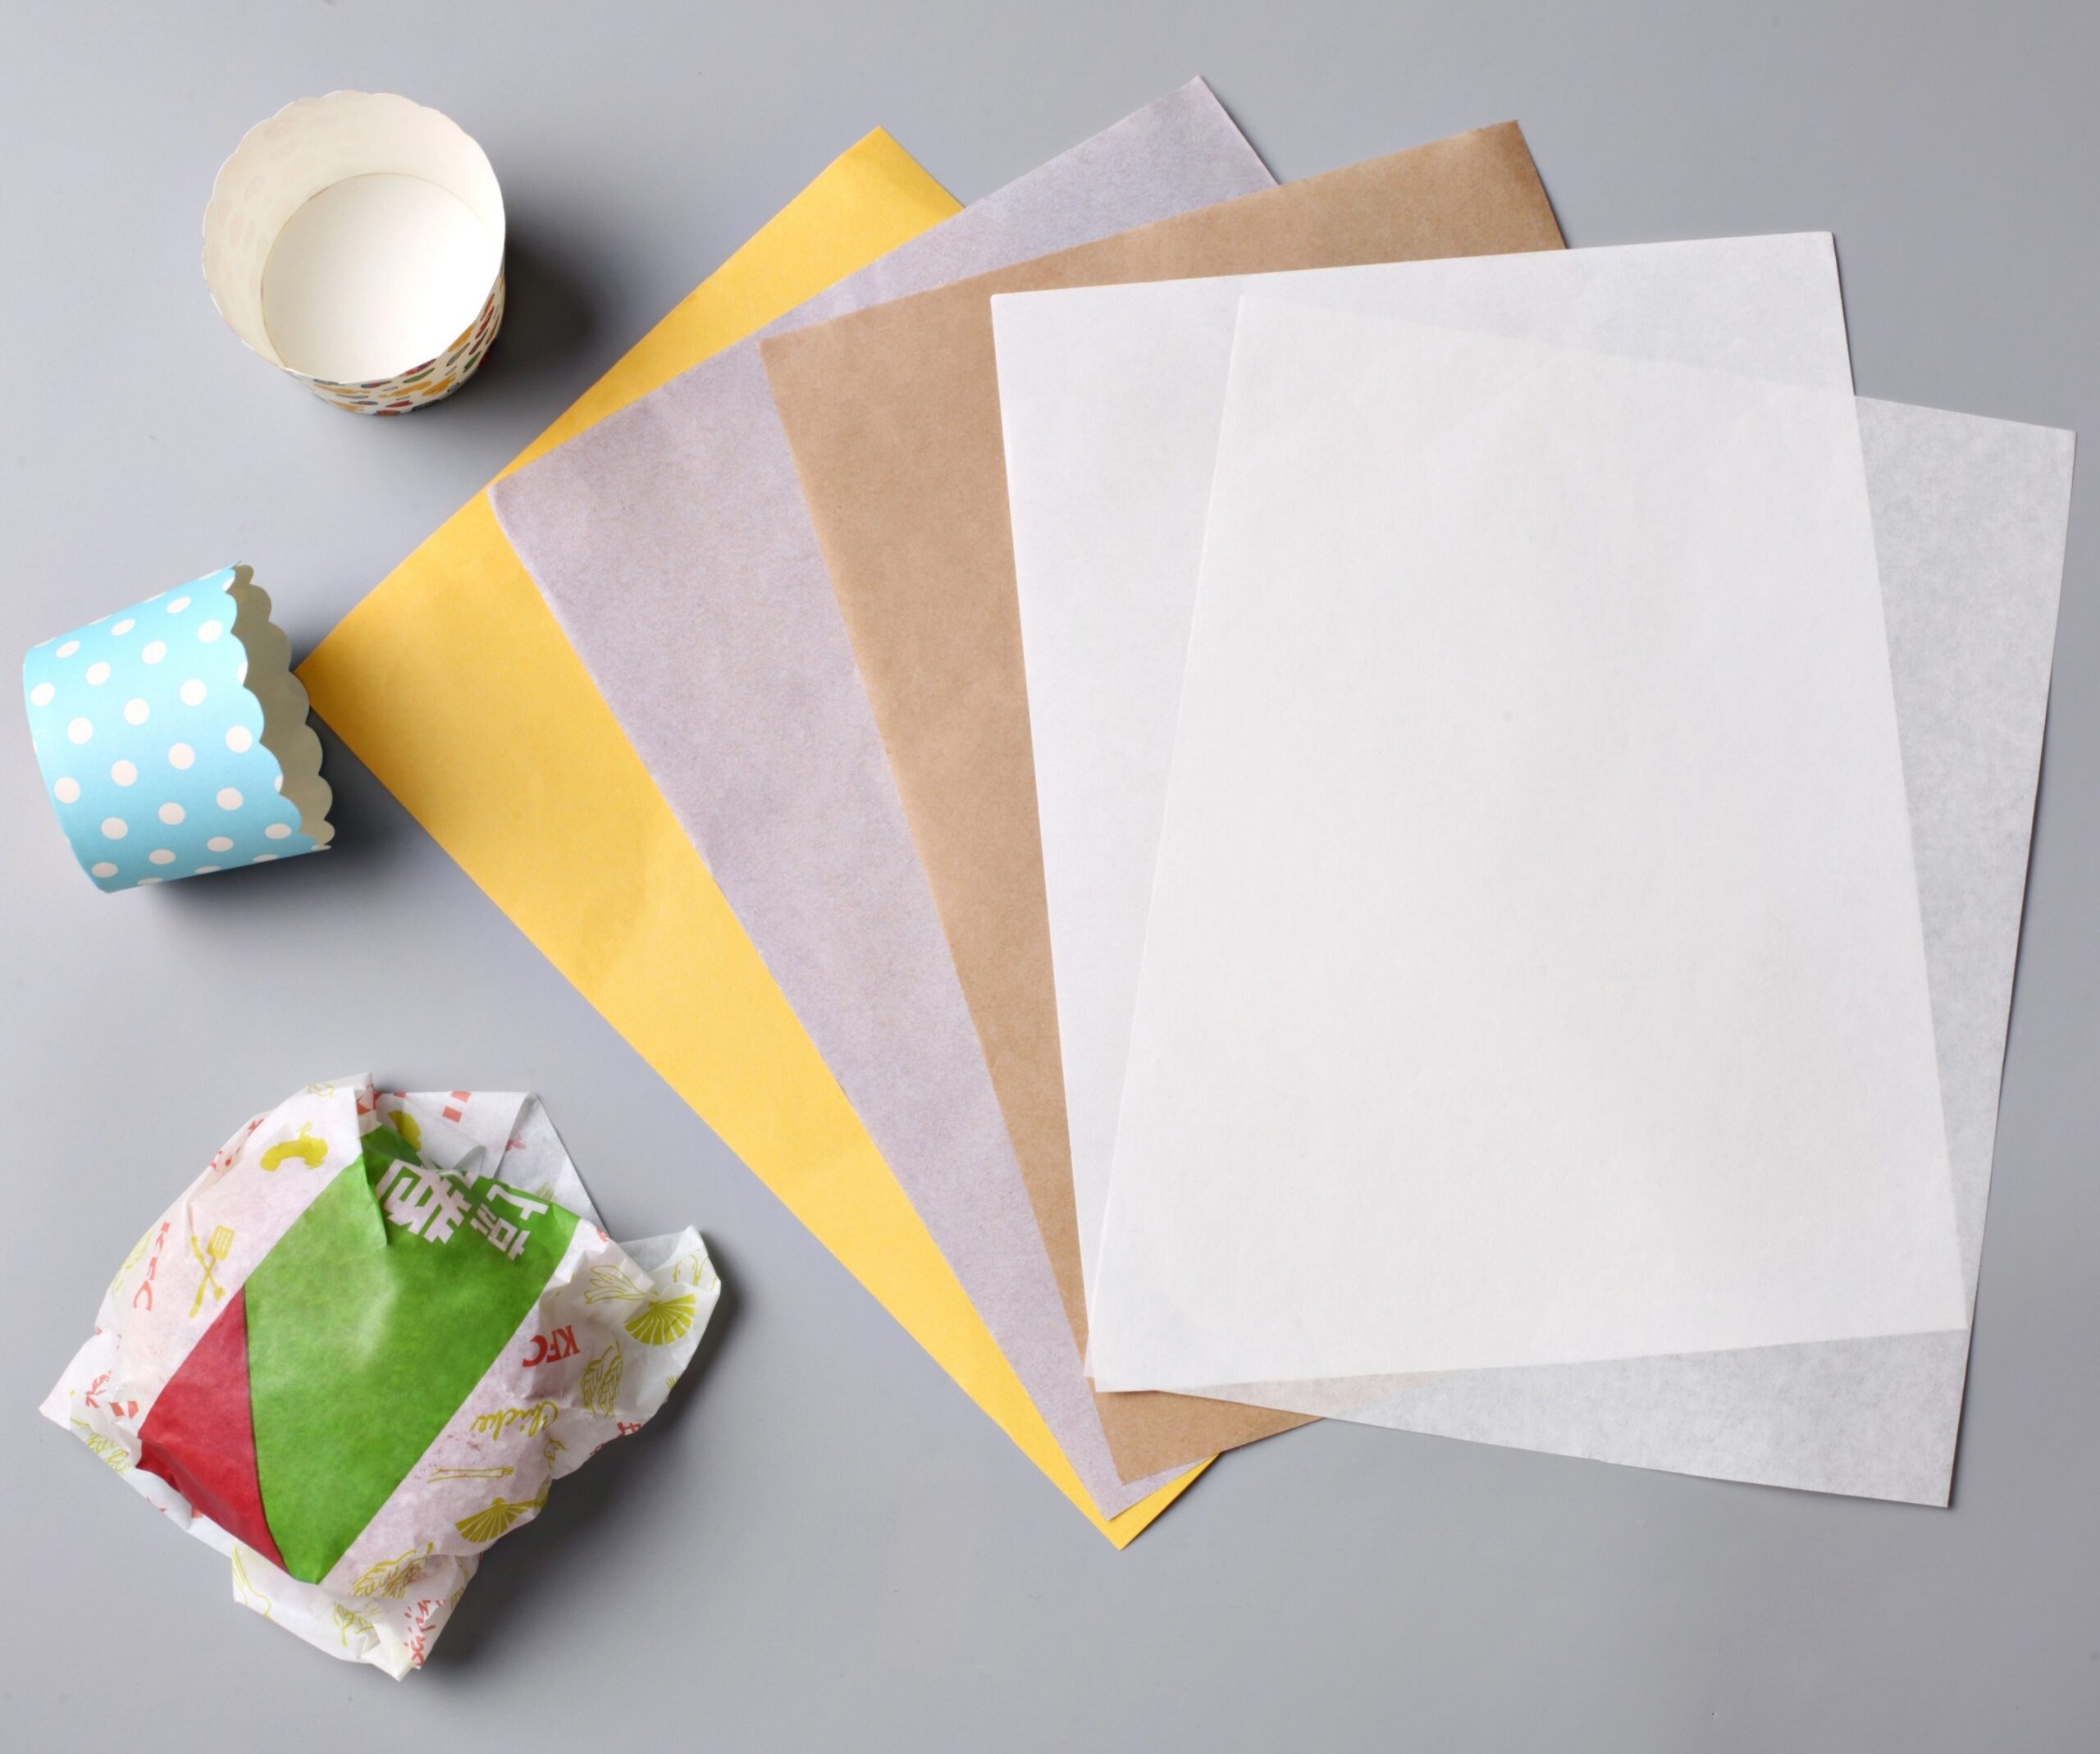 Greaseproof-Paper